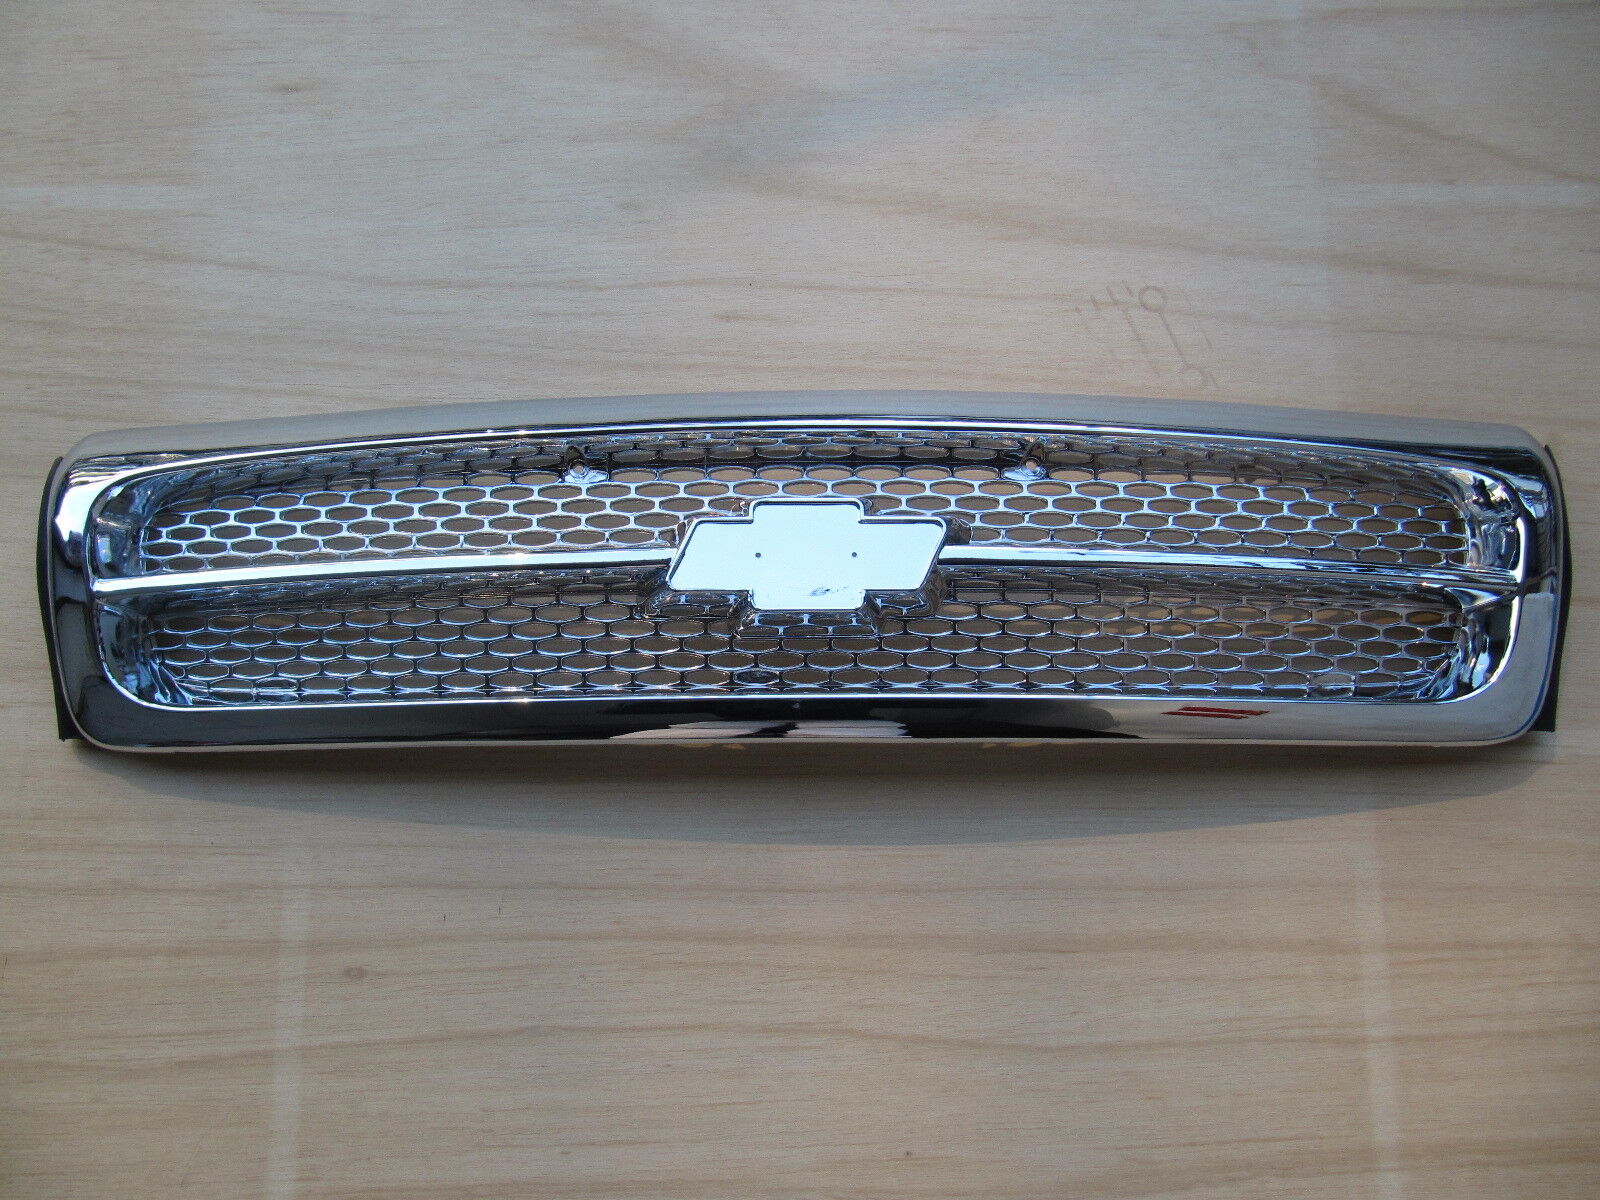 Fully Chrome Grille for Chevy Impala SS Caprice 1994-1996 Tiny imperfect